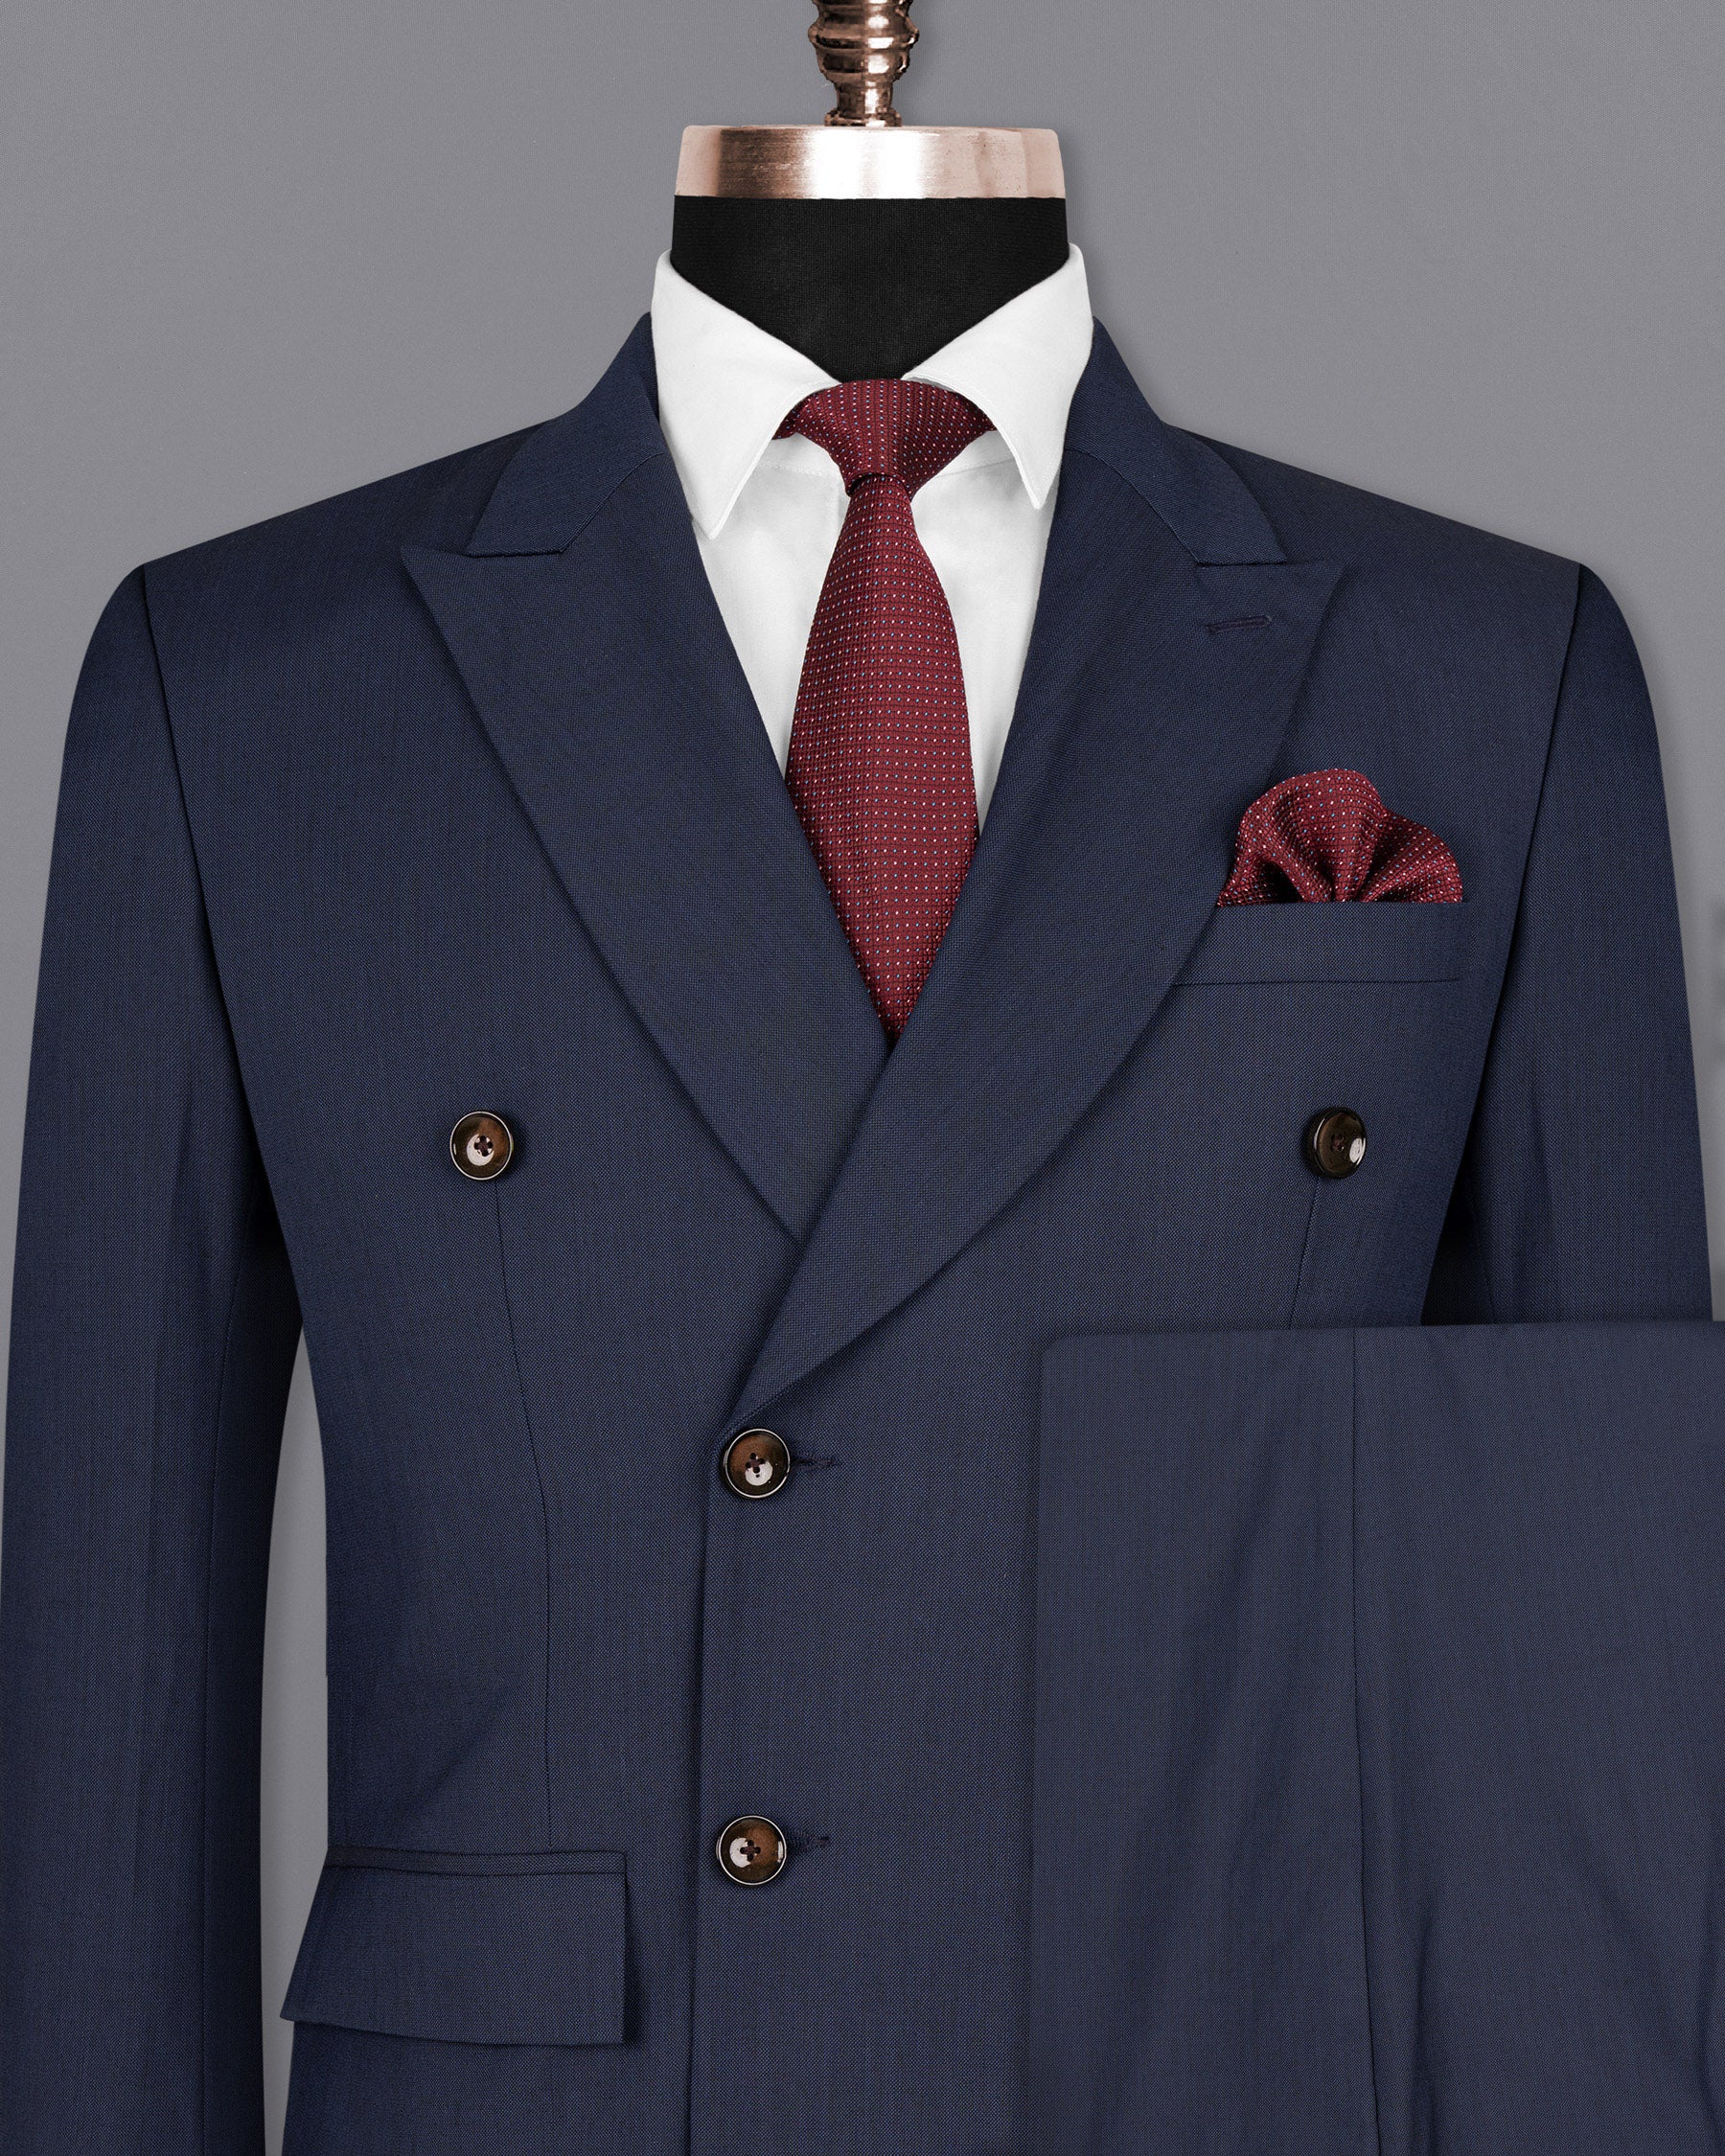 Tangaroa Blue Wool Rich Double Breasted Suit ST1536-DB-36, ST1536-DB-38, ST1536-DB-40, ST1536-DB-42, ST1536-DB-44, ST1536-DB-46, ST1536-DB-48, ST1536-DB-50, ST1536-DB-52, ST1536-DB-54, ST1536-DB-56, ST1536-DB-58, ST1536-DB-60